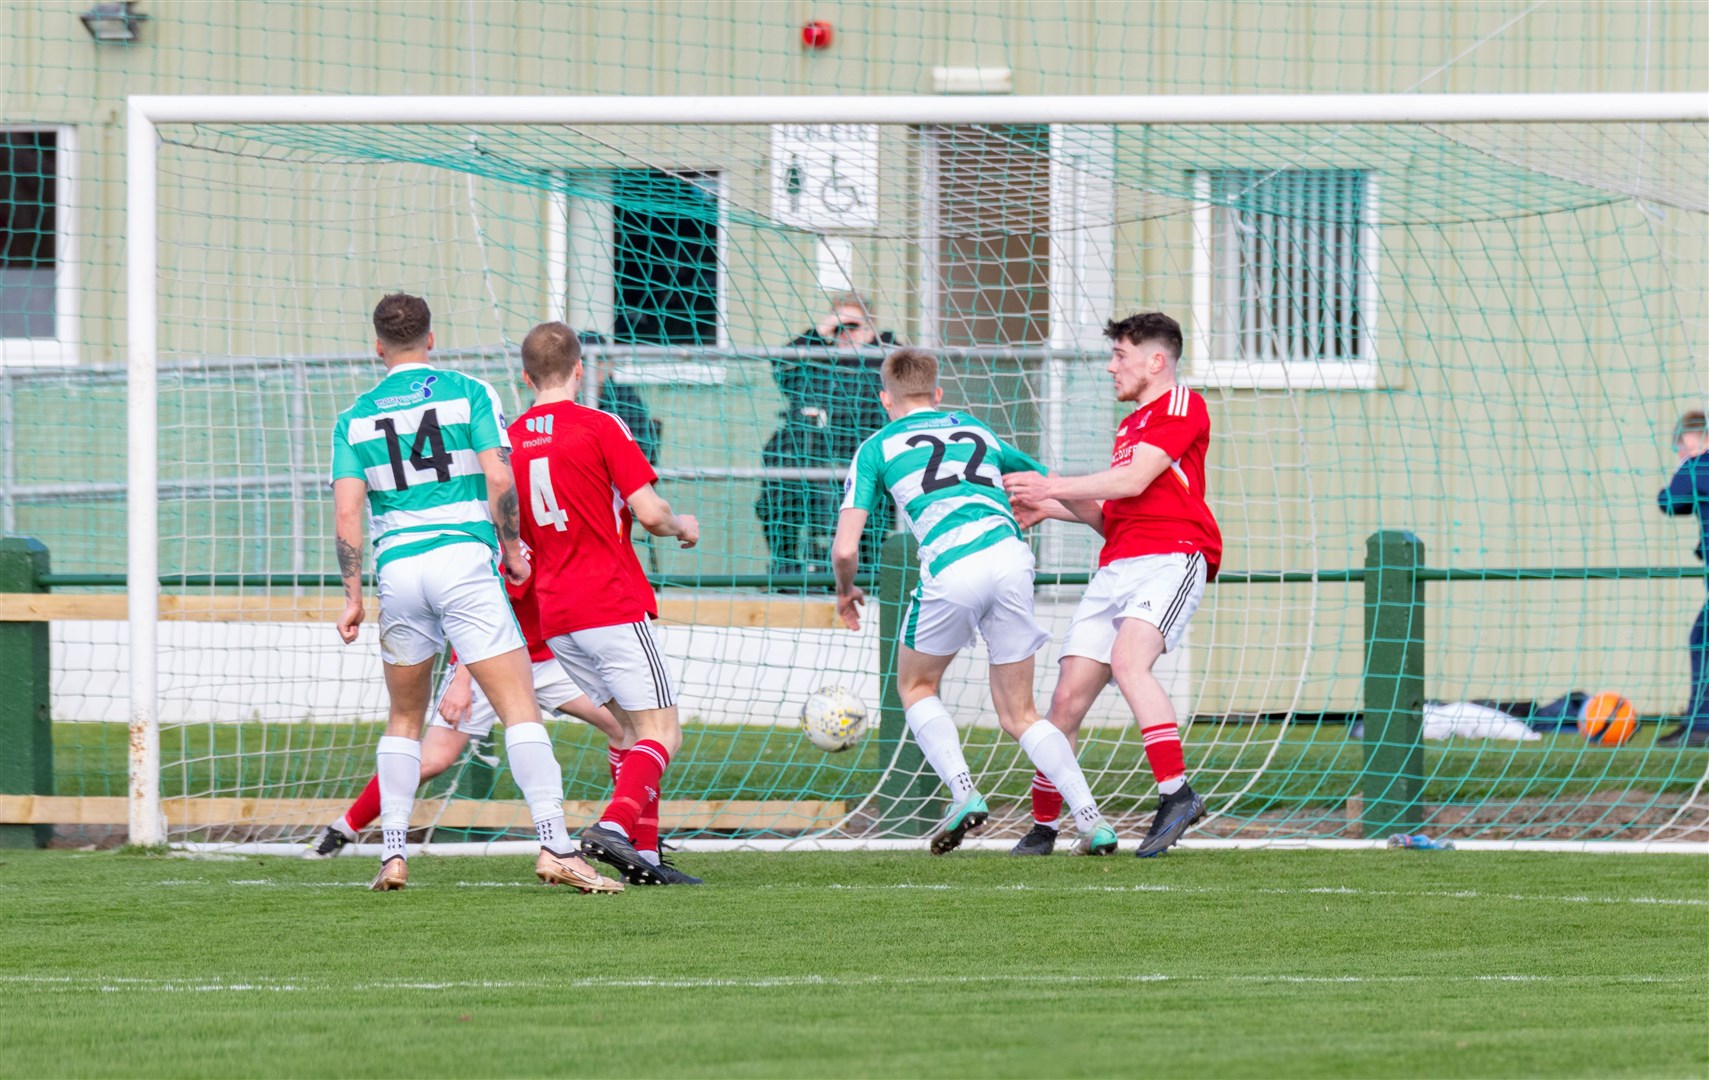 Buckie's Lyall Keir scores the equaliser.Buckie Thistle F.C. (6) v Deveronvale F.C. (1) at Victoria Park, Buckie, Highland Football League.Picture: Beth Taylor